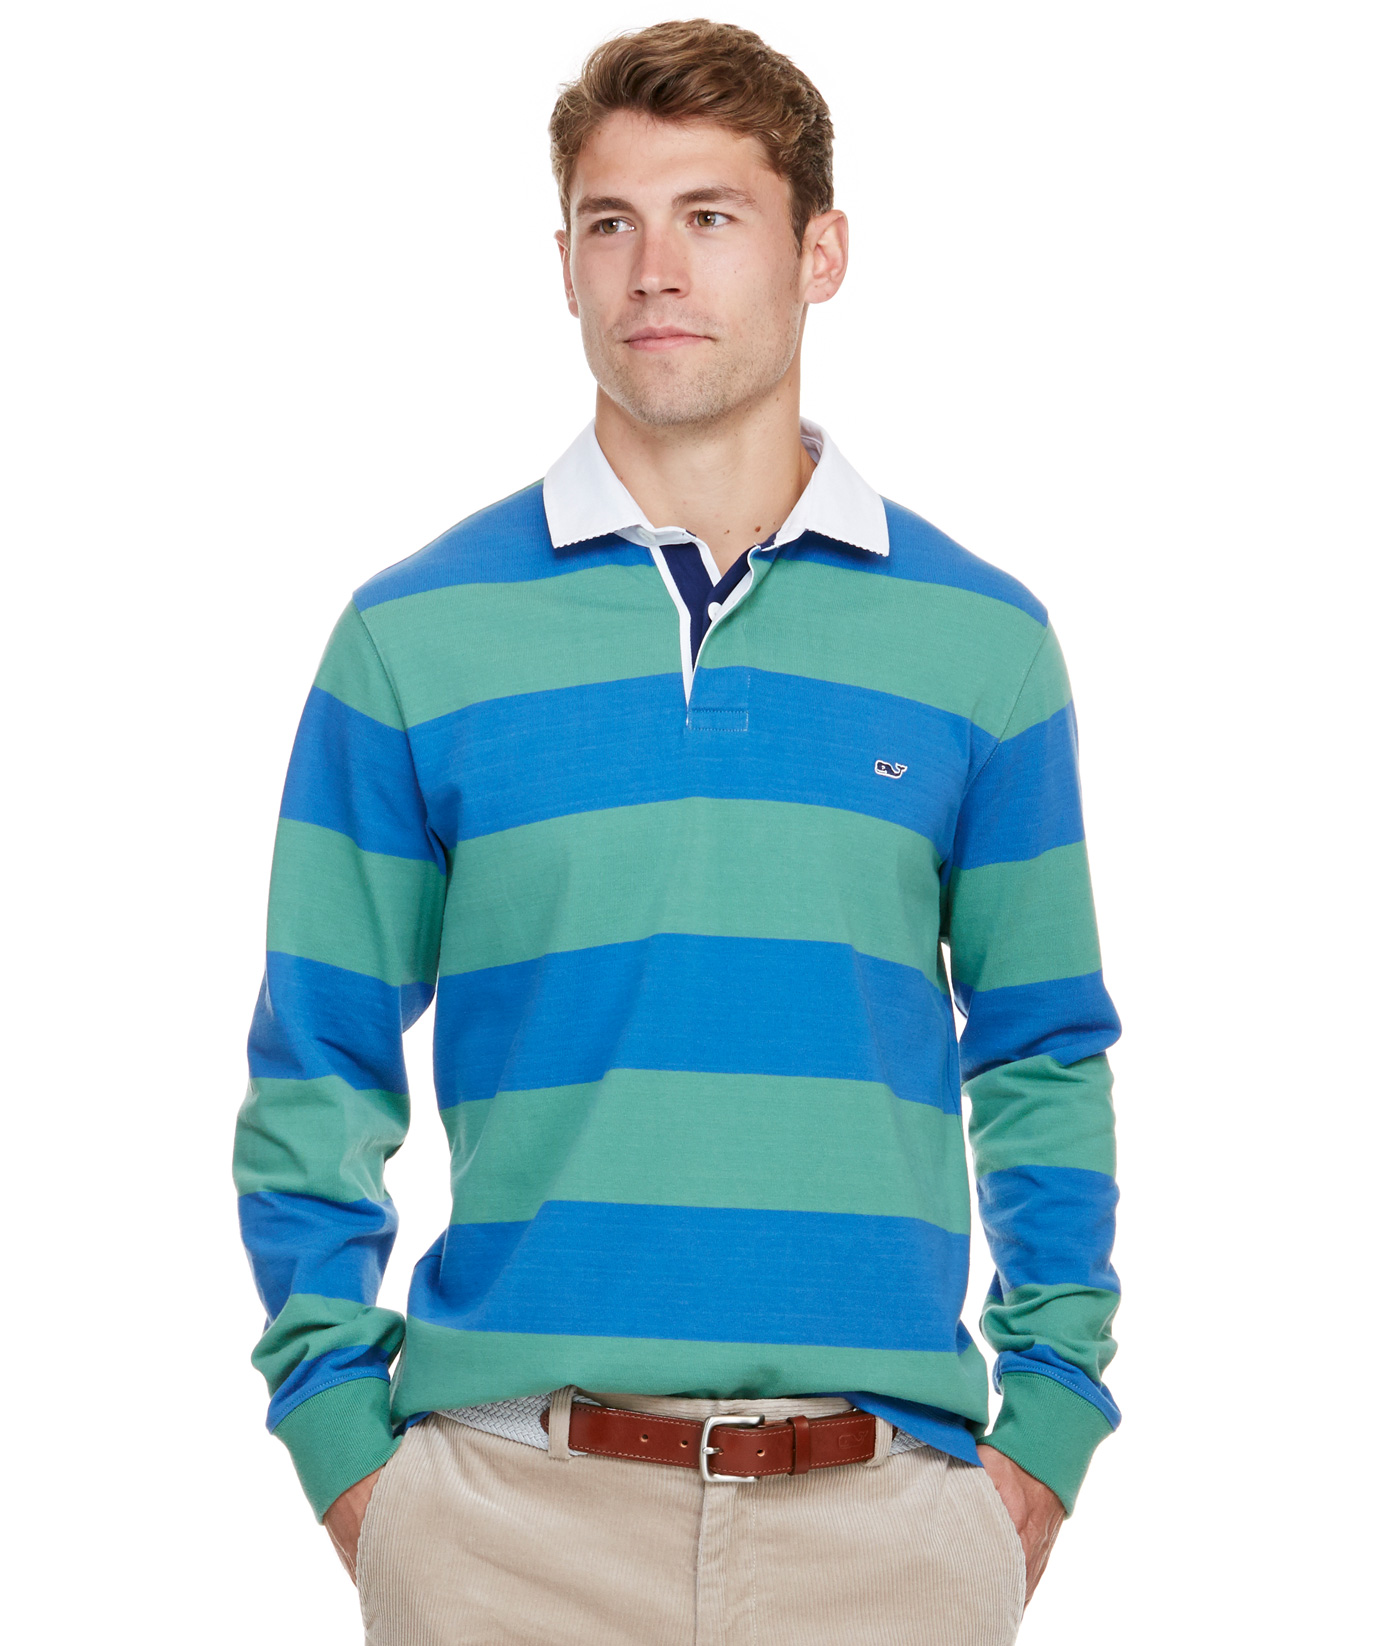 Shop Rugby Shirts: Canfield Rugby Shirt for Men | Vineyard Vines